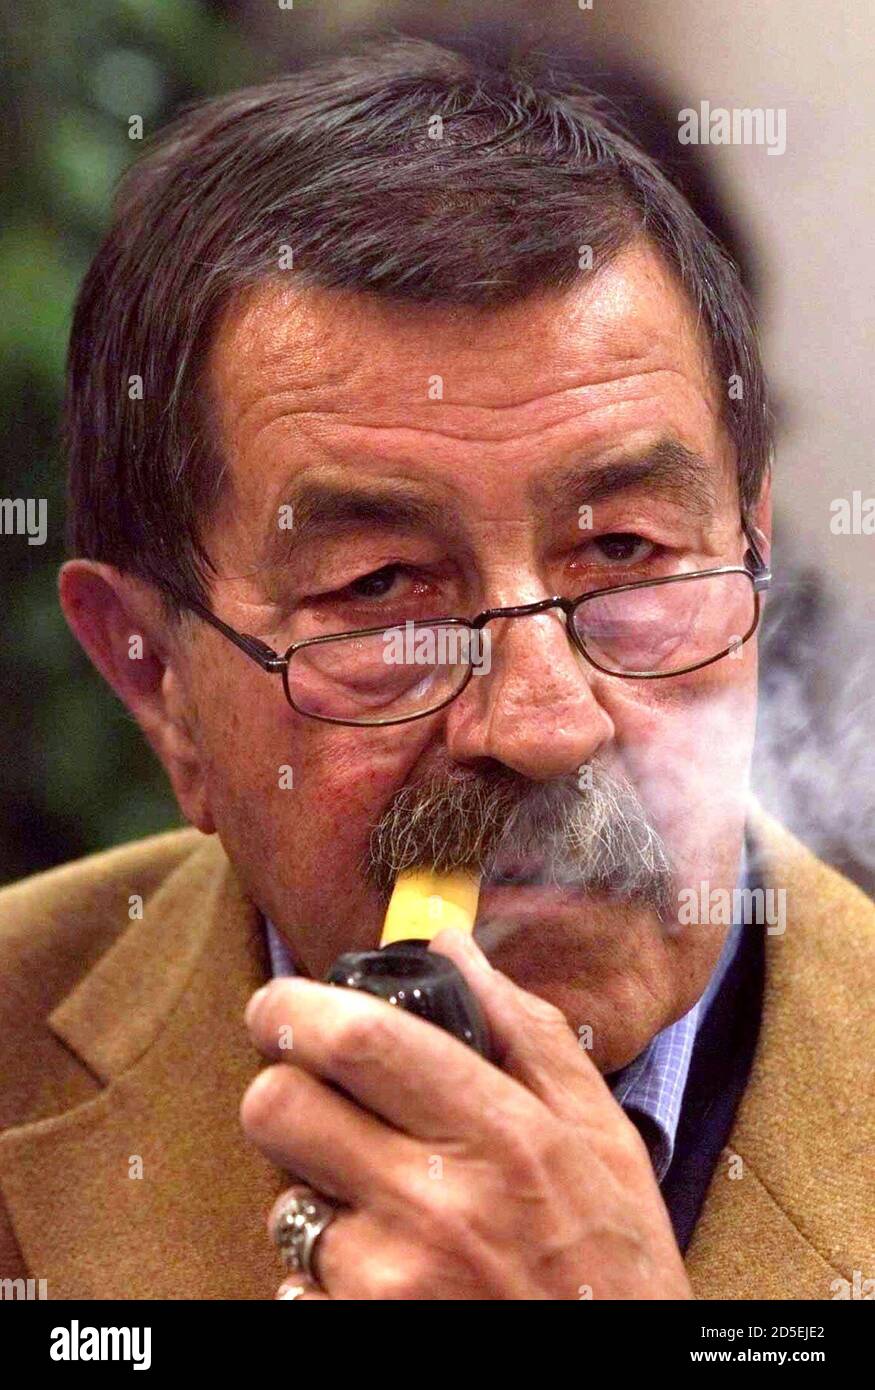 Famous German writer Guenter Grass smokes his pipe as he talks about his new book 'Vom Abenteuer der Aufklaerung', which translates as 'About the Adventure of Enlightenment', at Leipzig's book fair March 27. The book fair continues until March 28.  JE/JRE Stock Photo